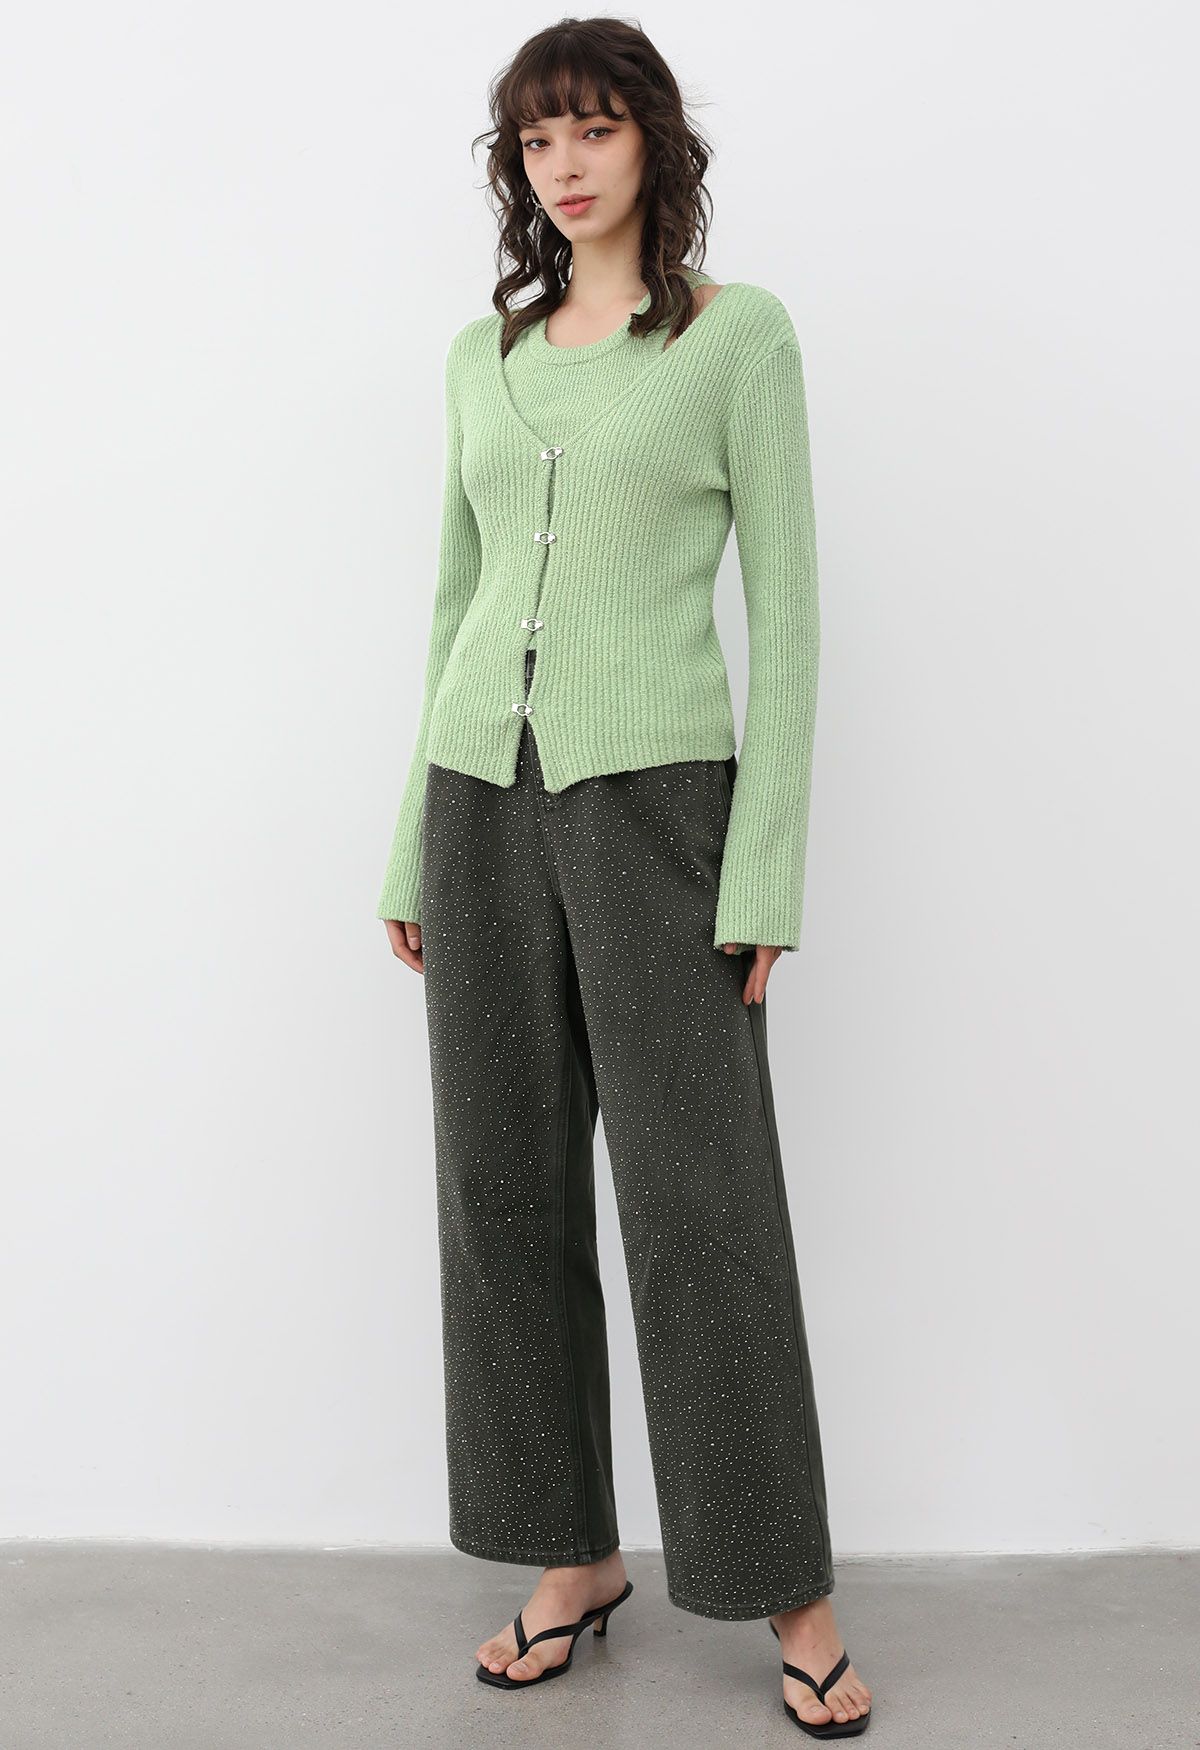 Hook Fastening Ribbed Knit Cardigan in Pistachio